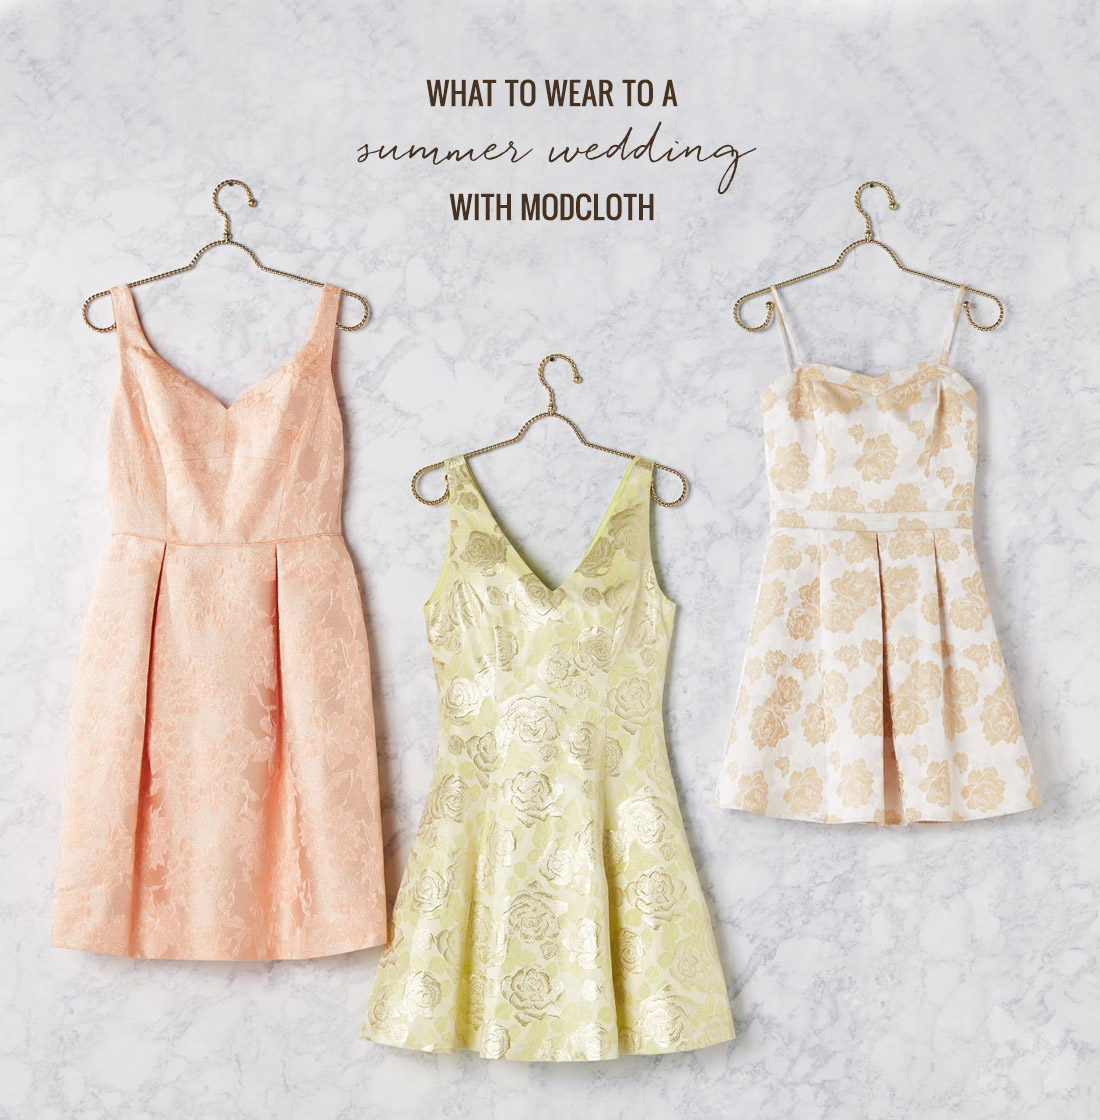 What to Wear to a Summer Wedding with Modcloth